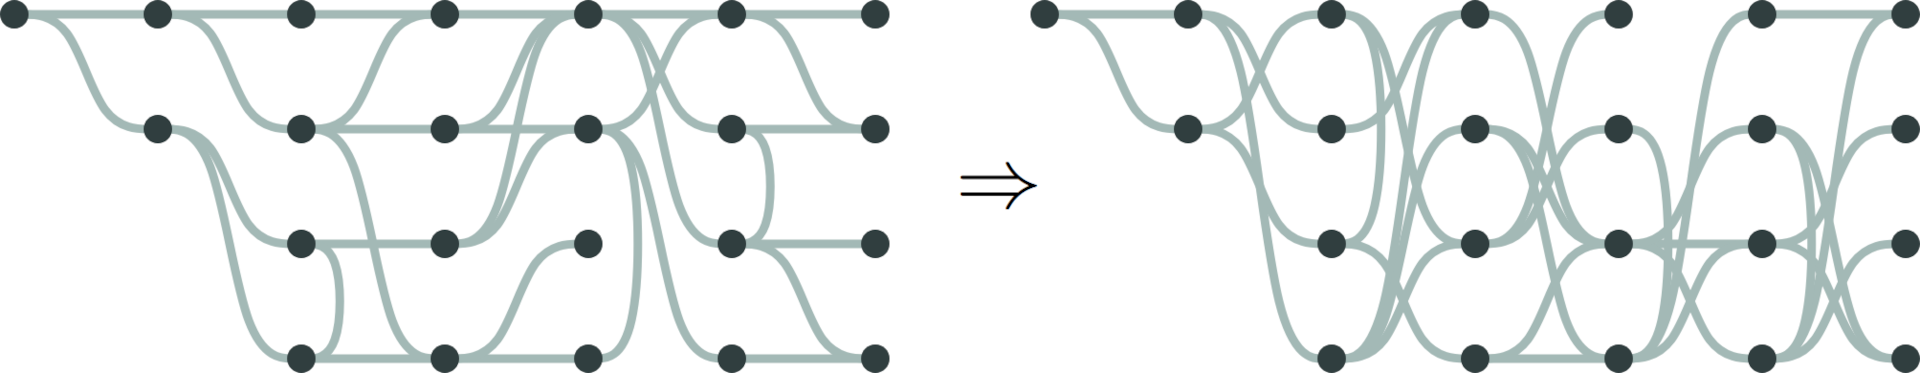 Two drawings of a layered graph, the left one with few crossings using a conventional layout and the right one with optimally maximal crossings created using our new layout.